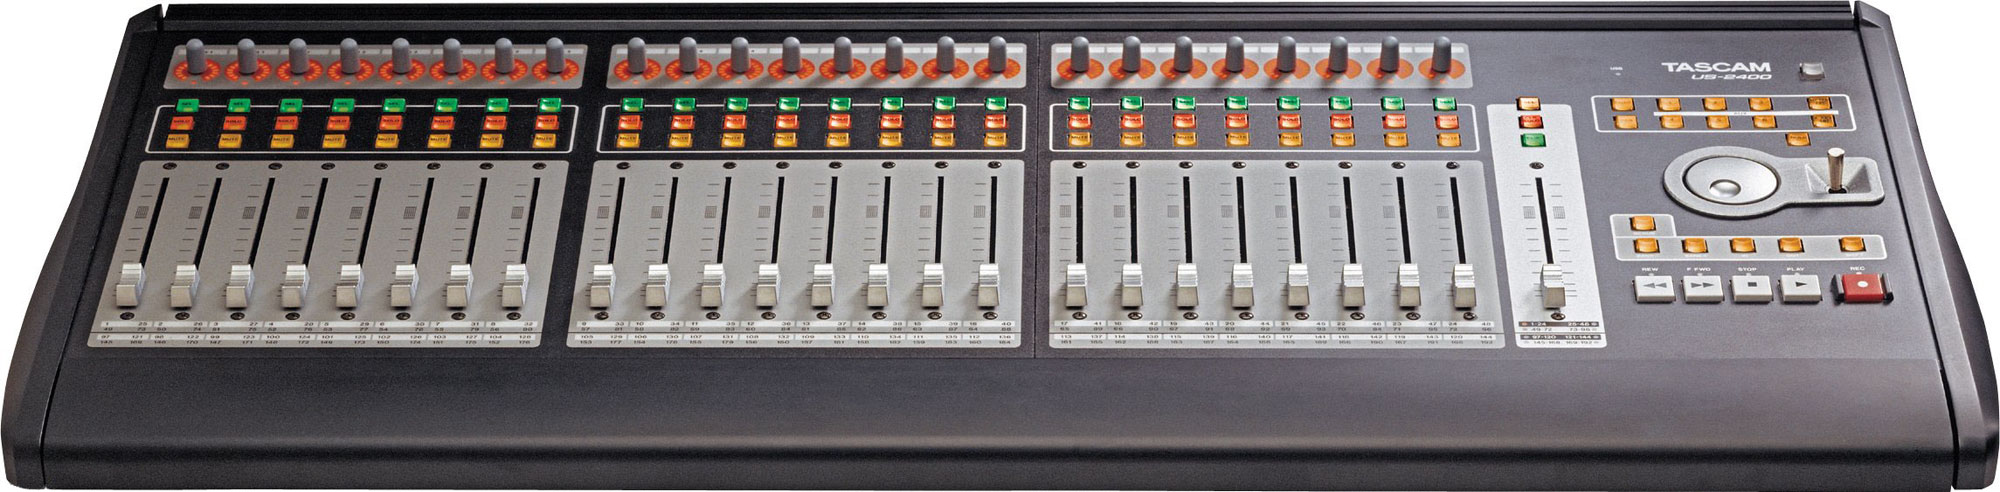 http://tascam.com/content/images/universal/product_detail/315/large/US-2400-front-crop.jpg